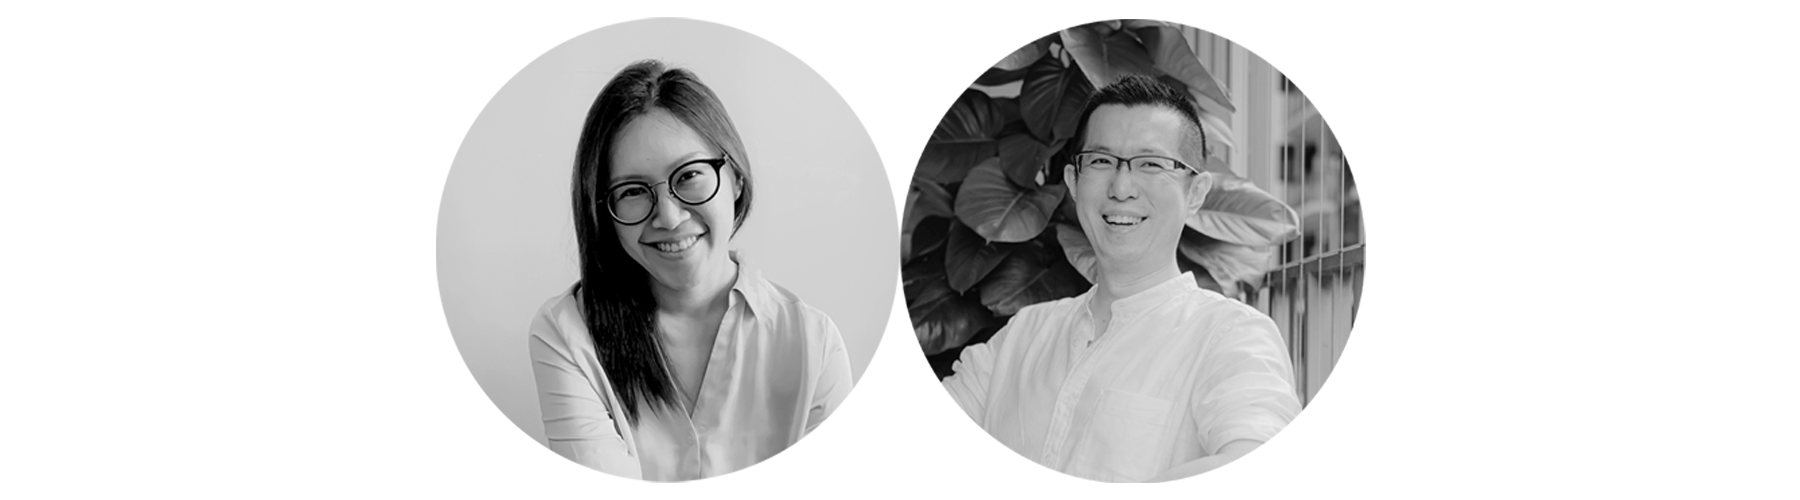 Co-founders - Florence Tay and Keith Tan